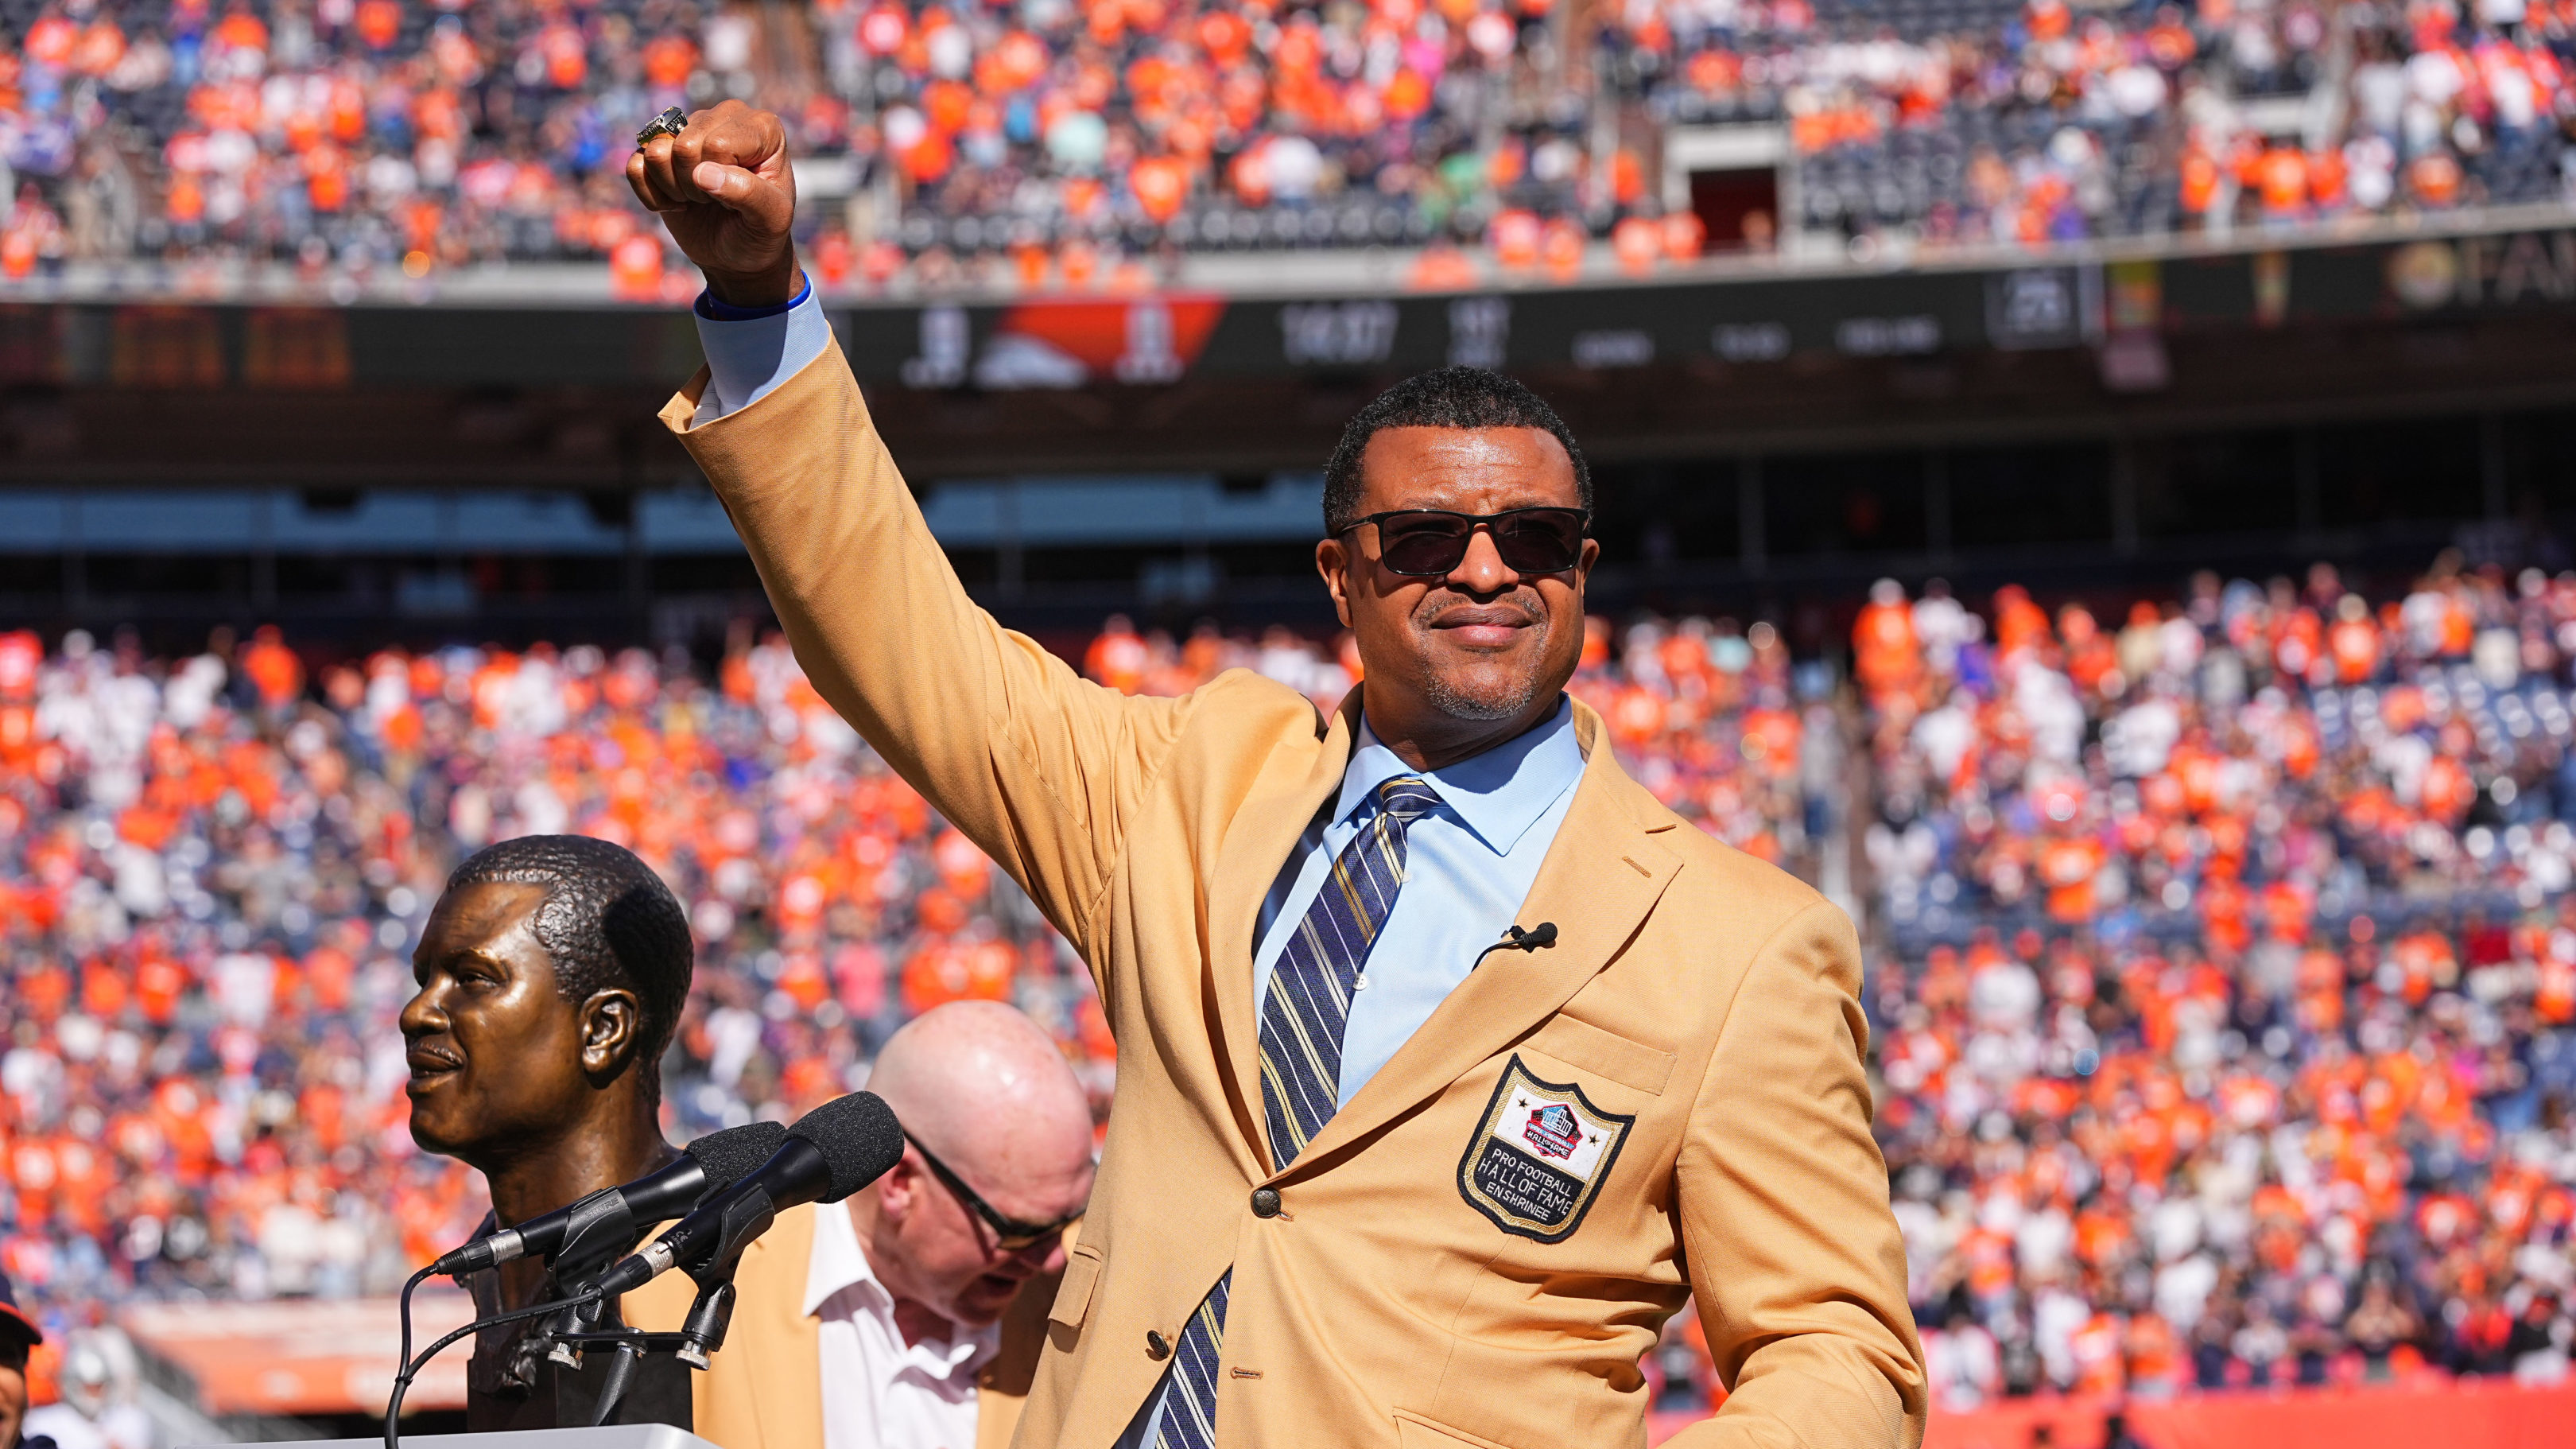 Steve Atwater in the Pro Football Hall of Fame: He made his